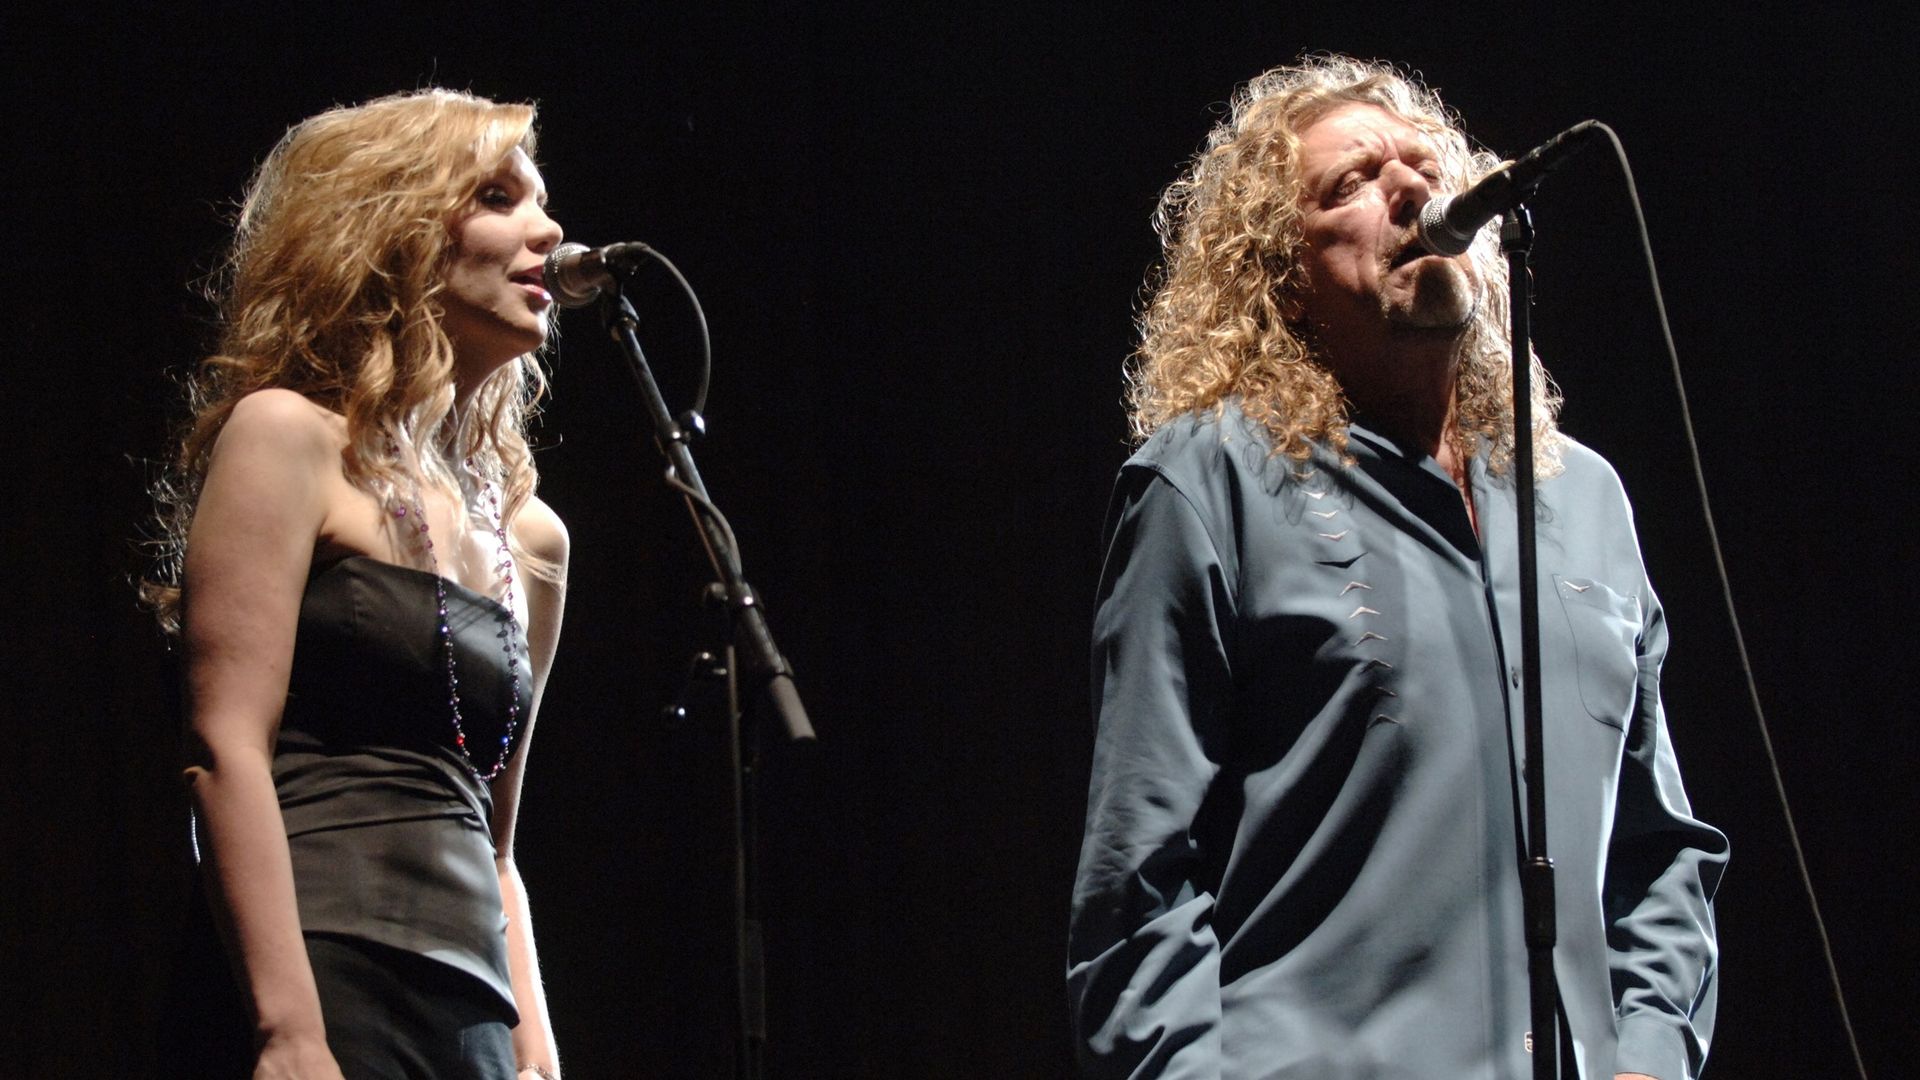 high-and-lonesome-de-robert-plant-et-alison-krauss-a-ecouter-ici